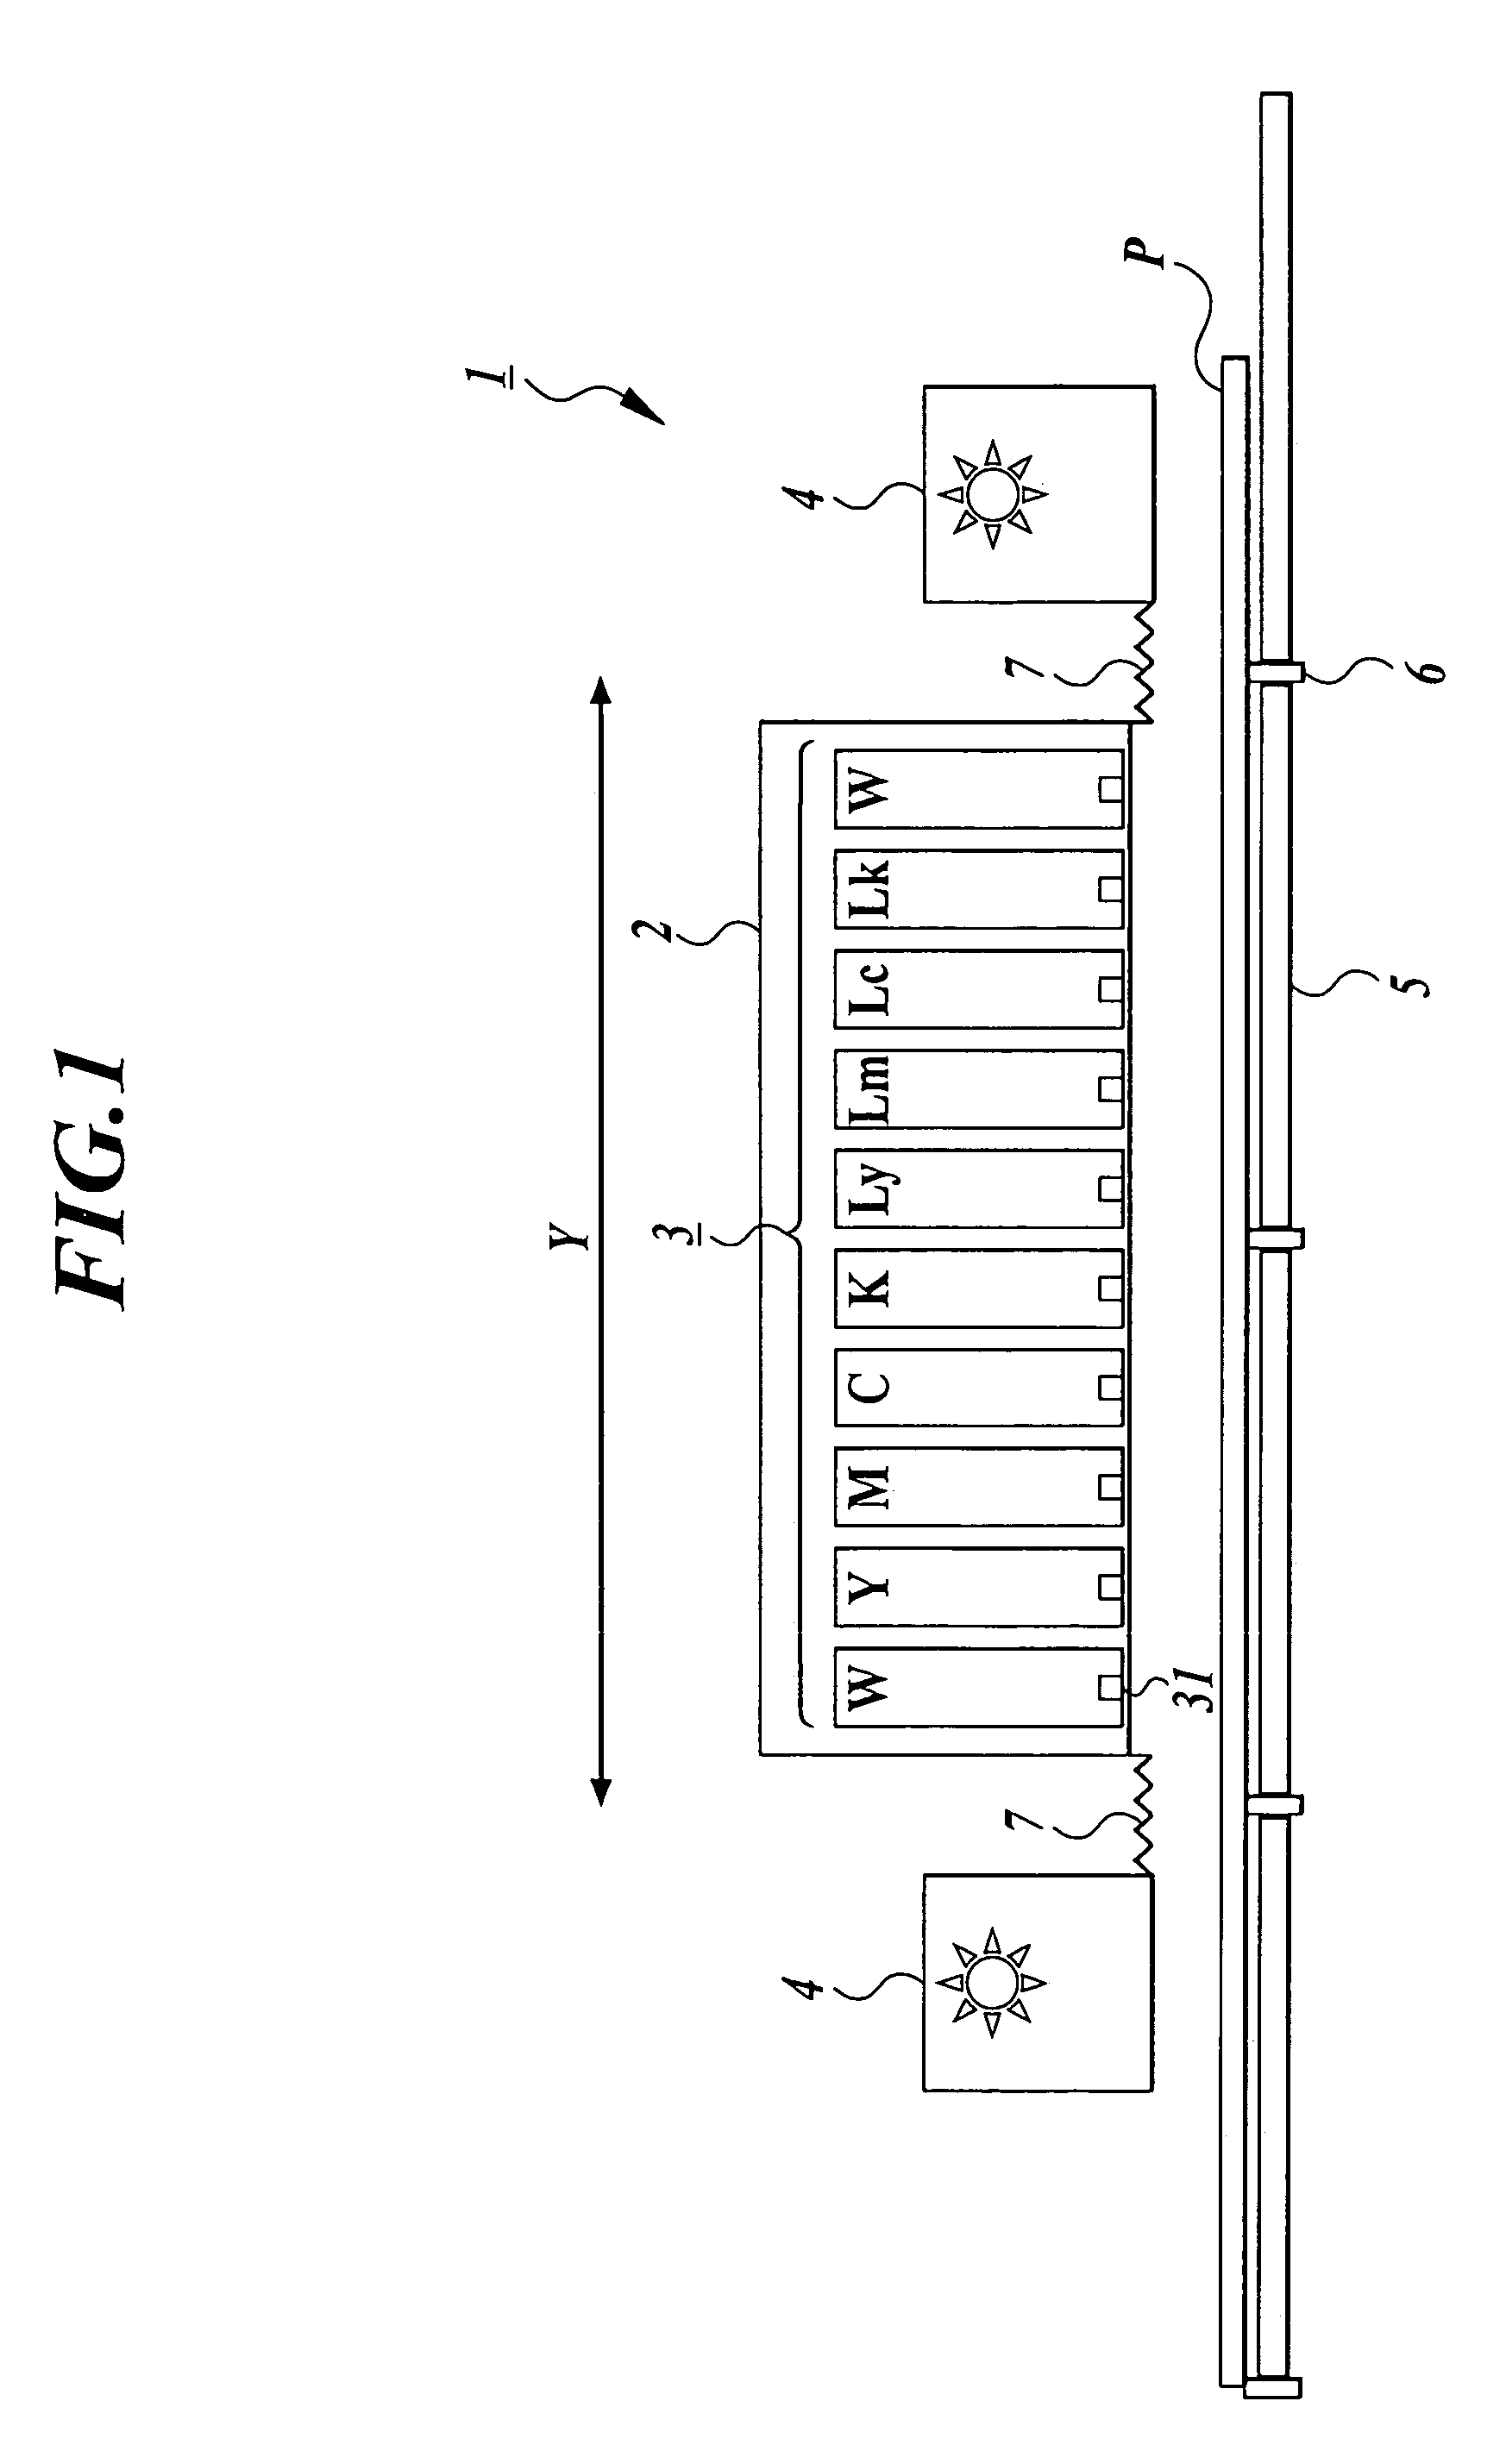 Active ray curable ink jet solventless ink, image forming method using the same, and ink jet recording apparatus